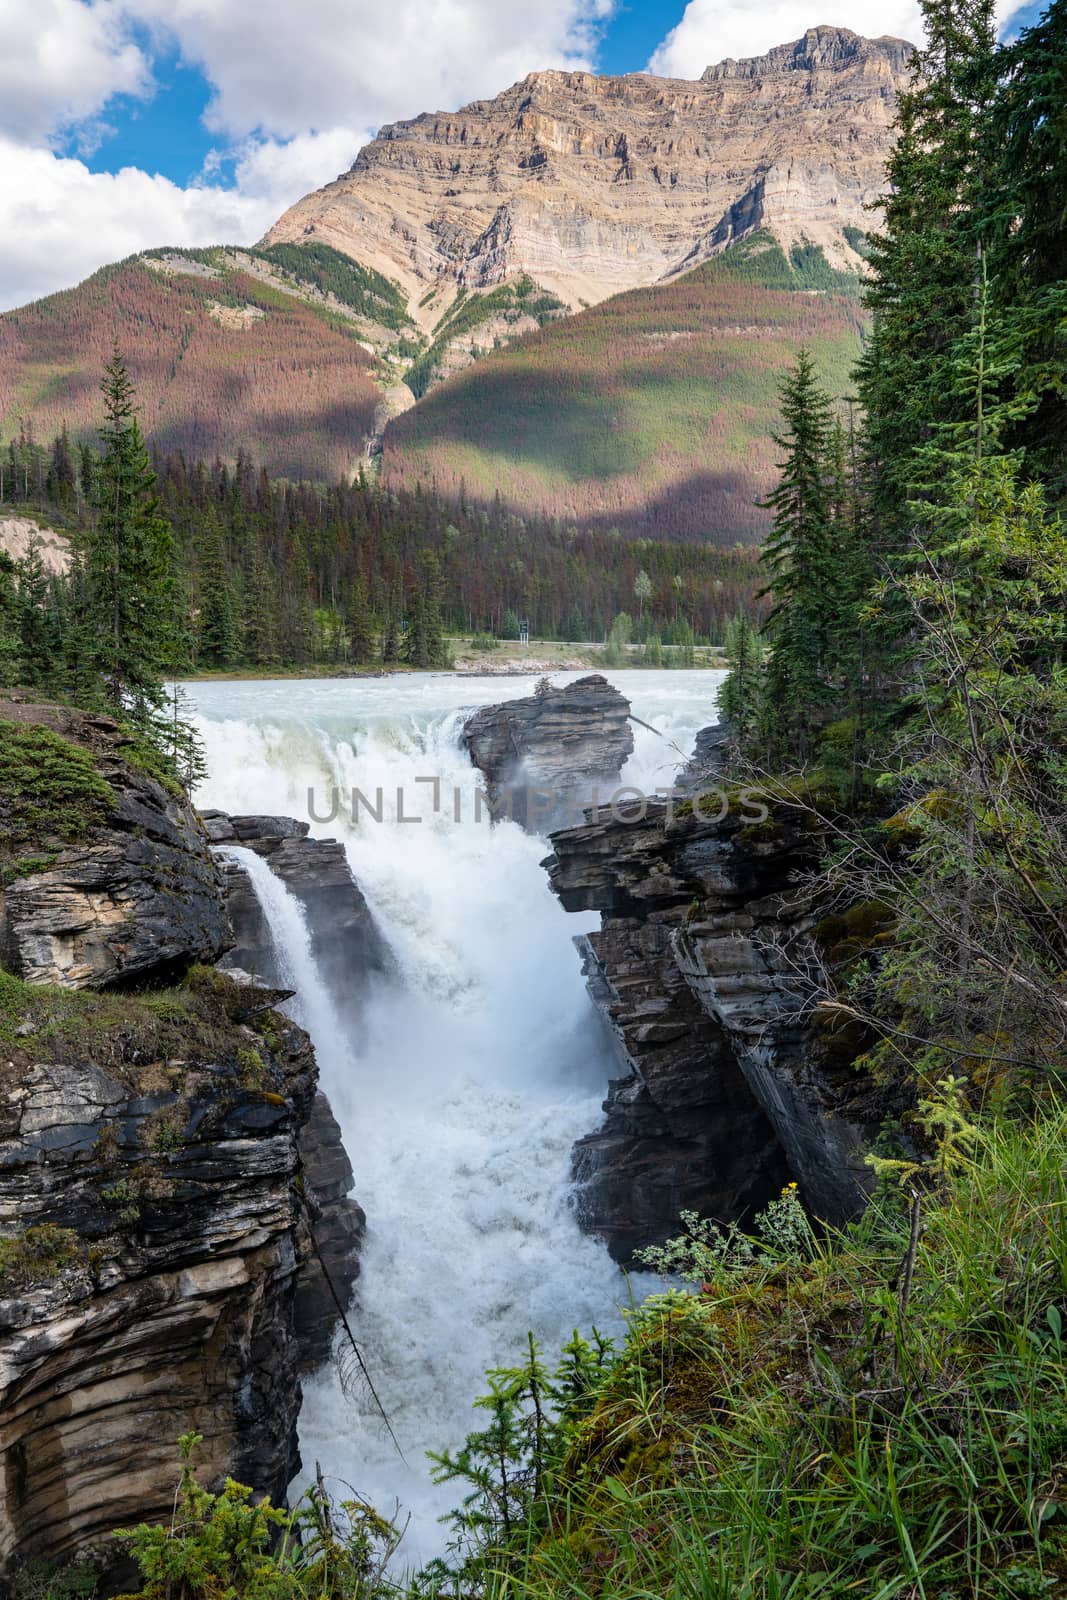 Panoramic image of the Athabasca Falls, beautiful place close to the Icefields Parkway, Jasper National Park, Alberta, Canada